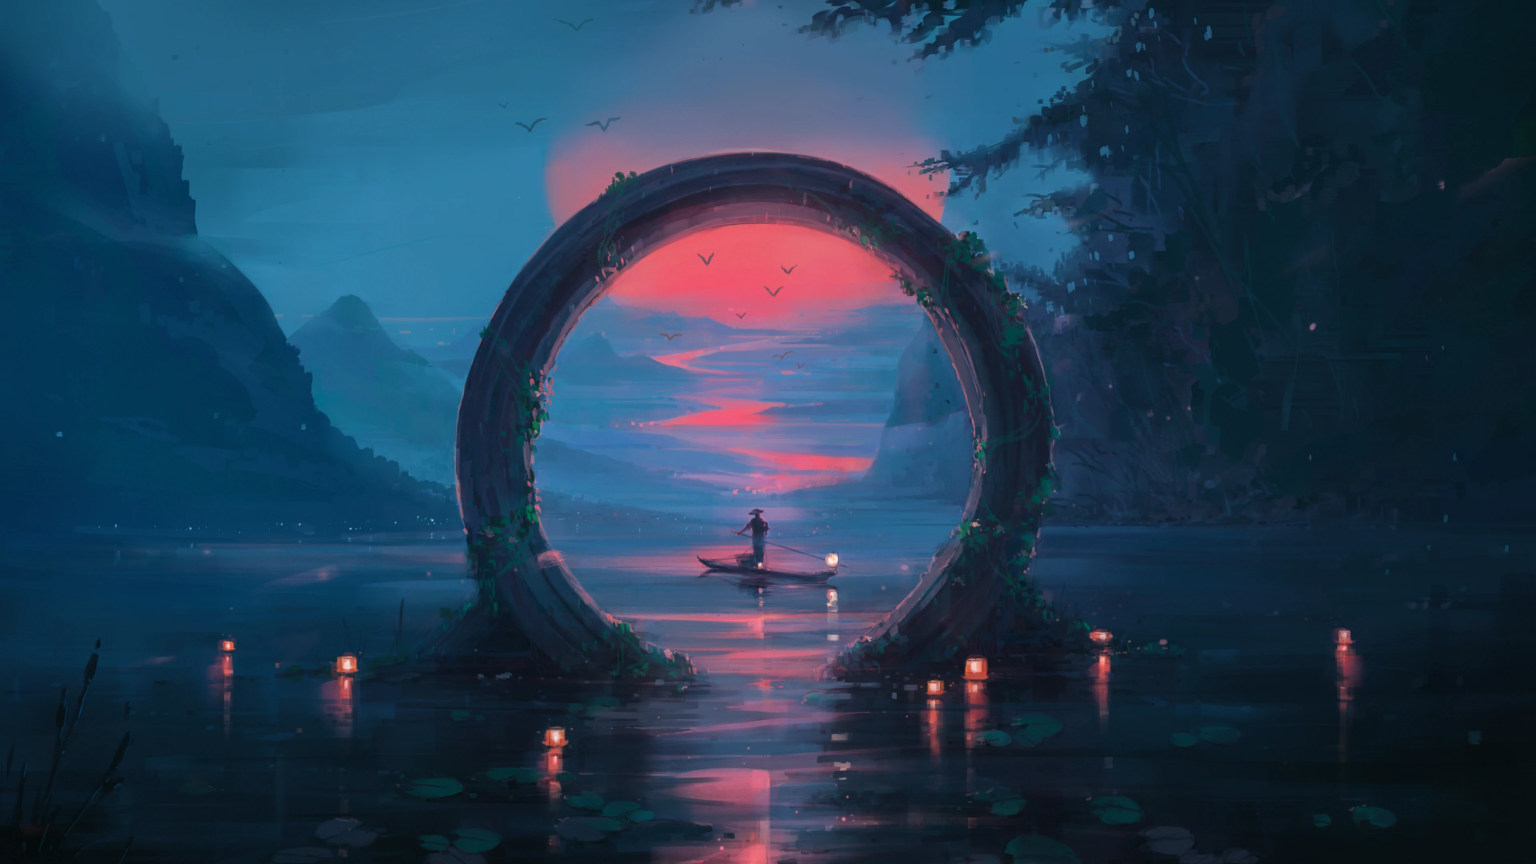 The Gate to Serenity